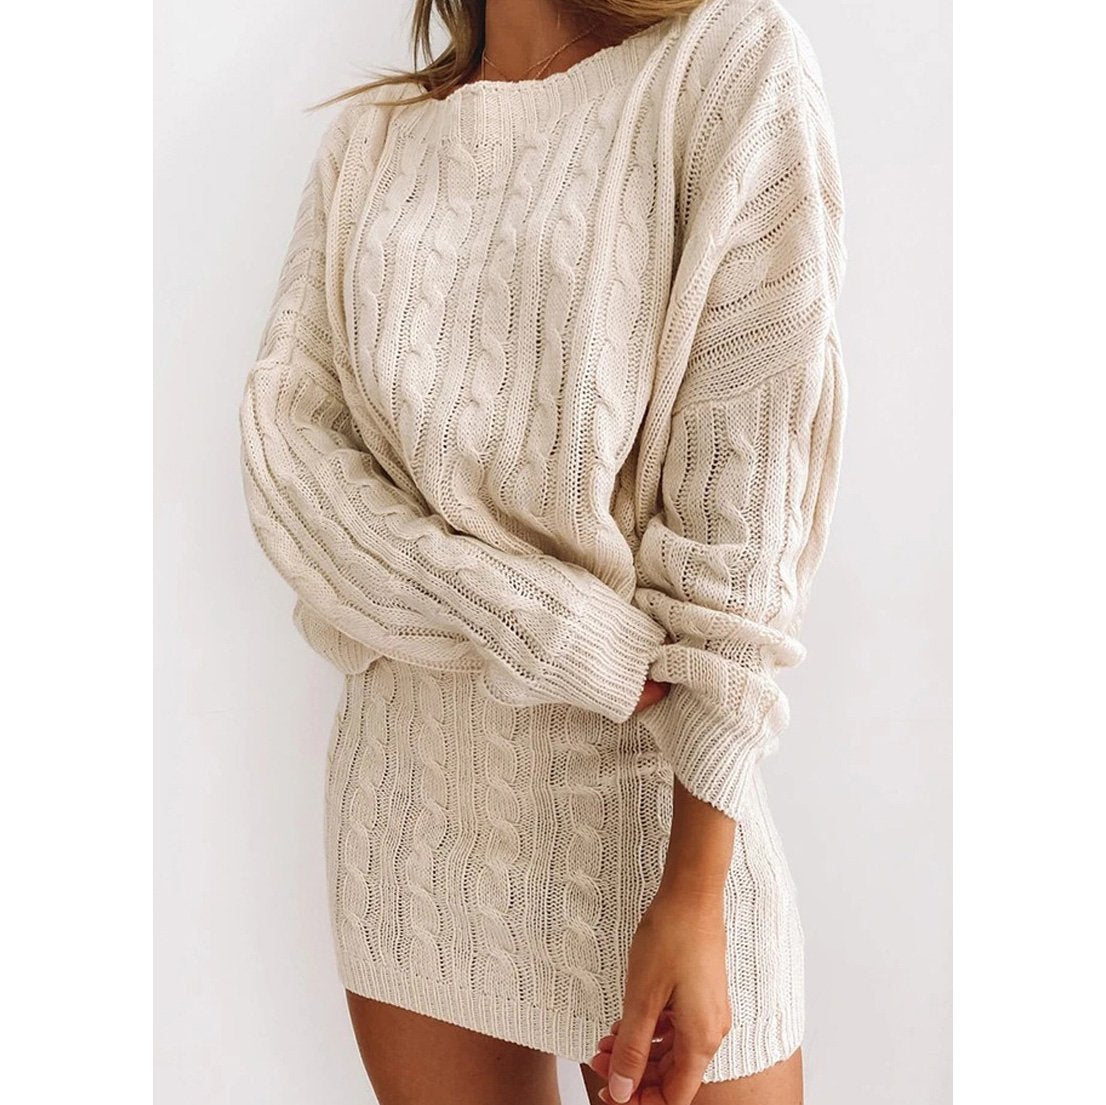 Viona Long Sleeve Knitted Sweater and Skirt Set